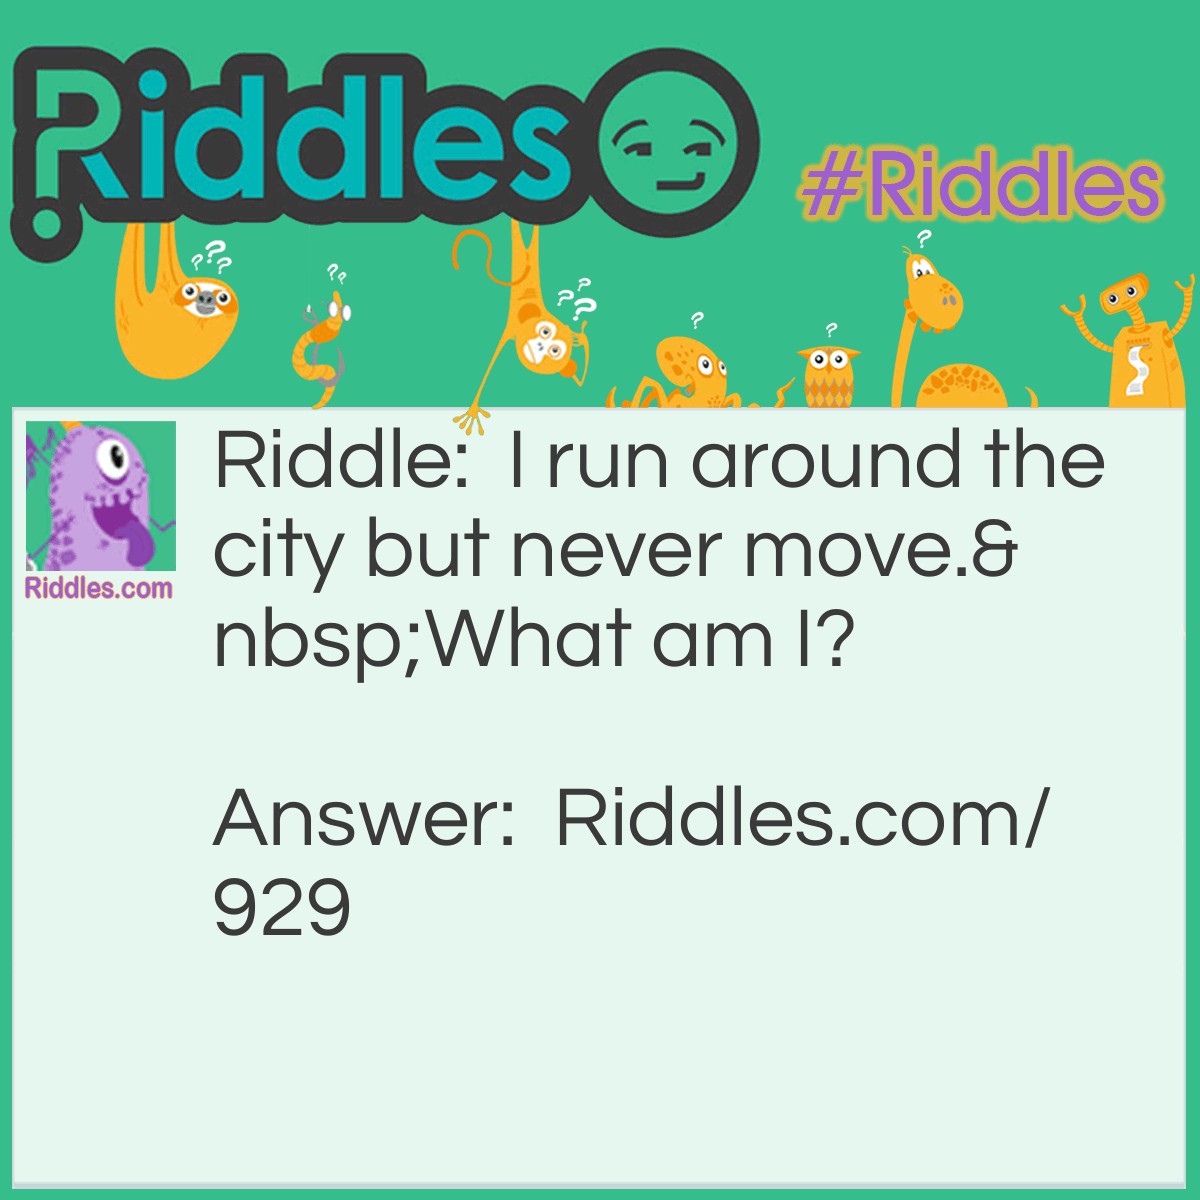 Riddle: I run around the city but never move.
What am I? Answer: A city wall.